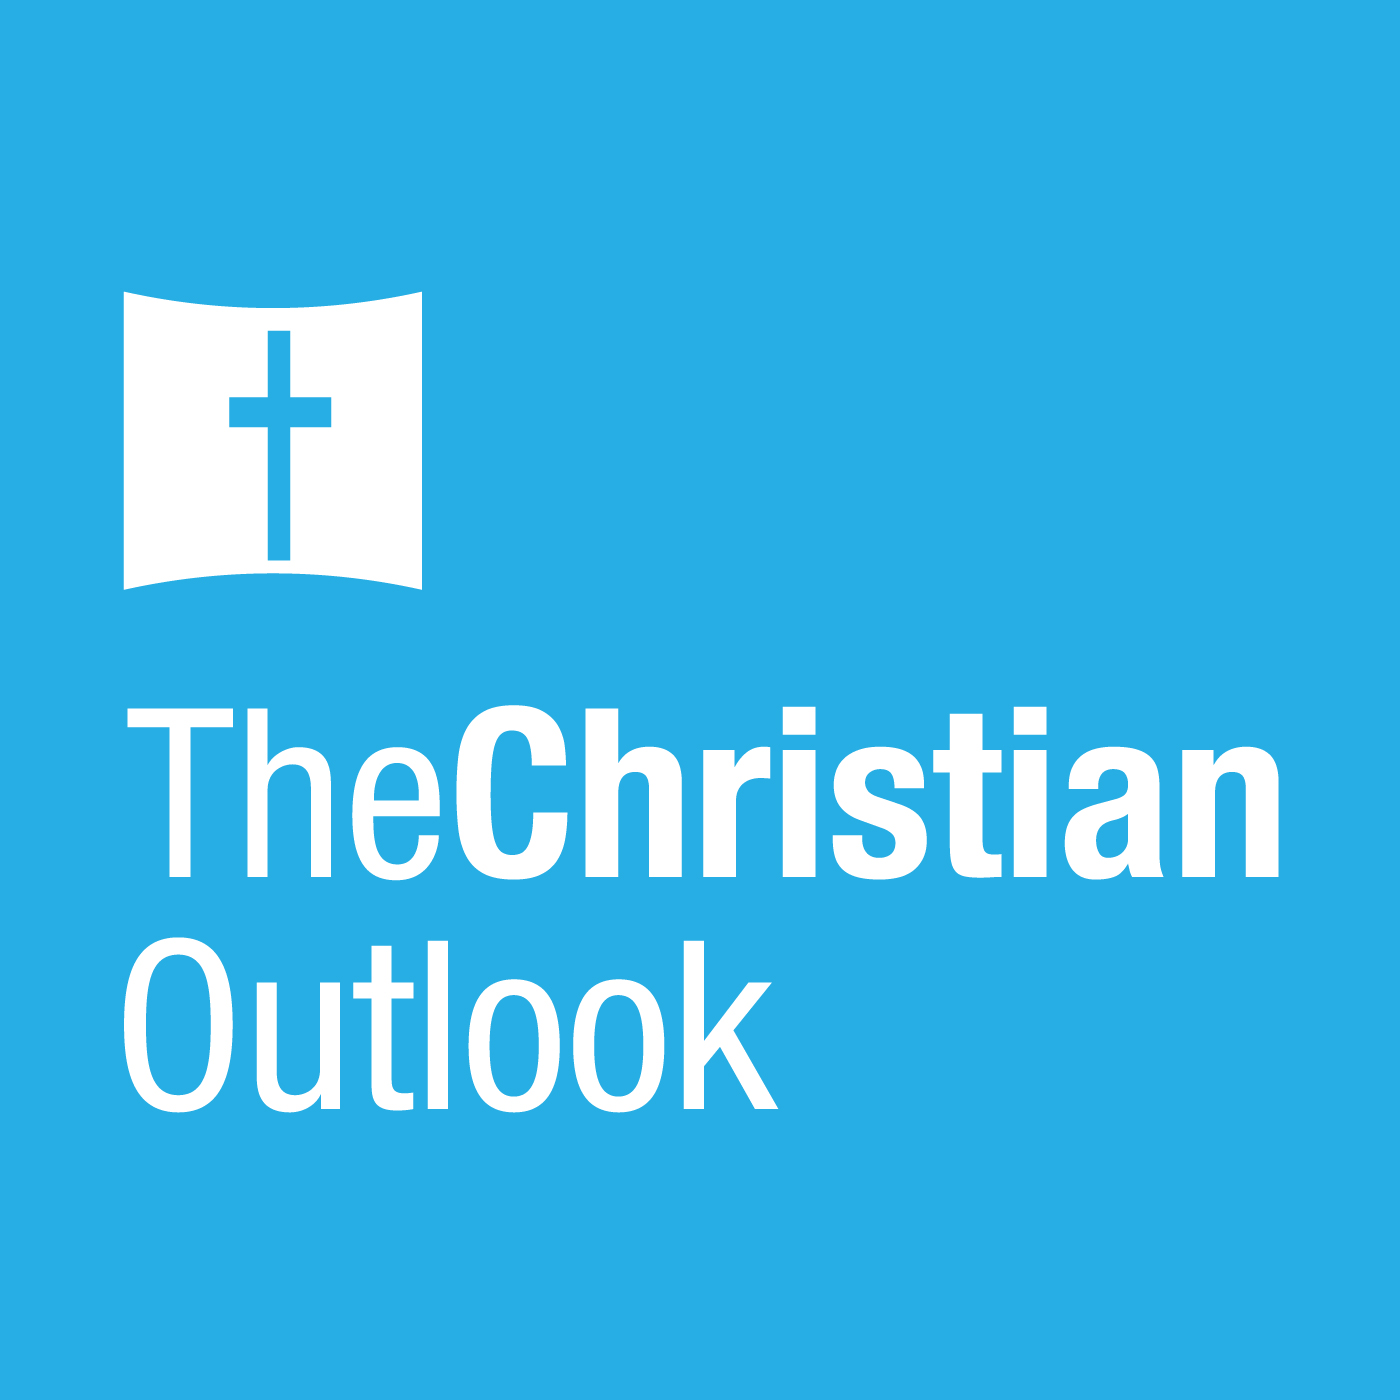 TCO 9/3/16: Why Christians Should Care About France's Burkini Ban